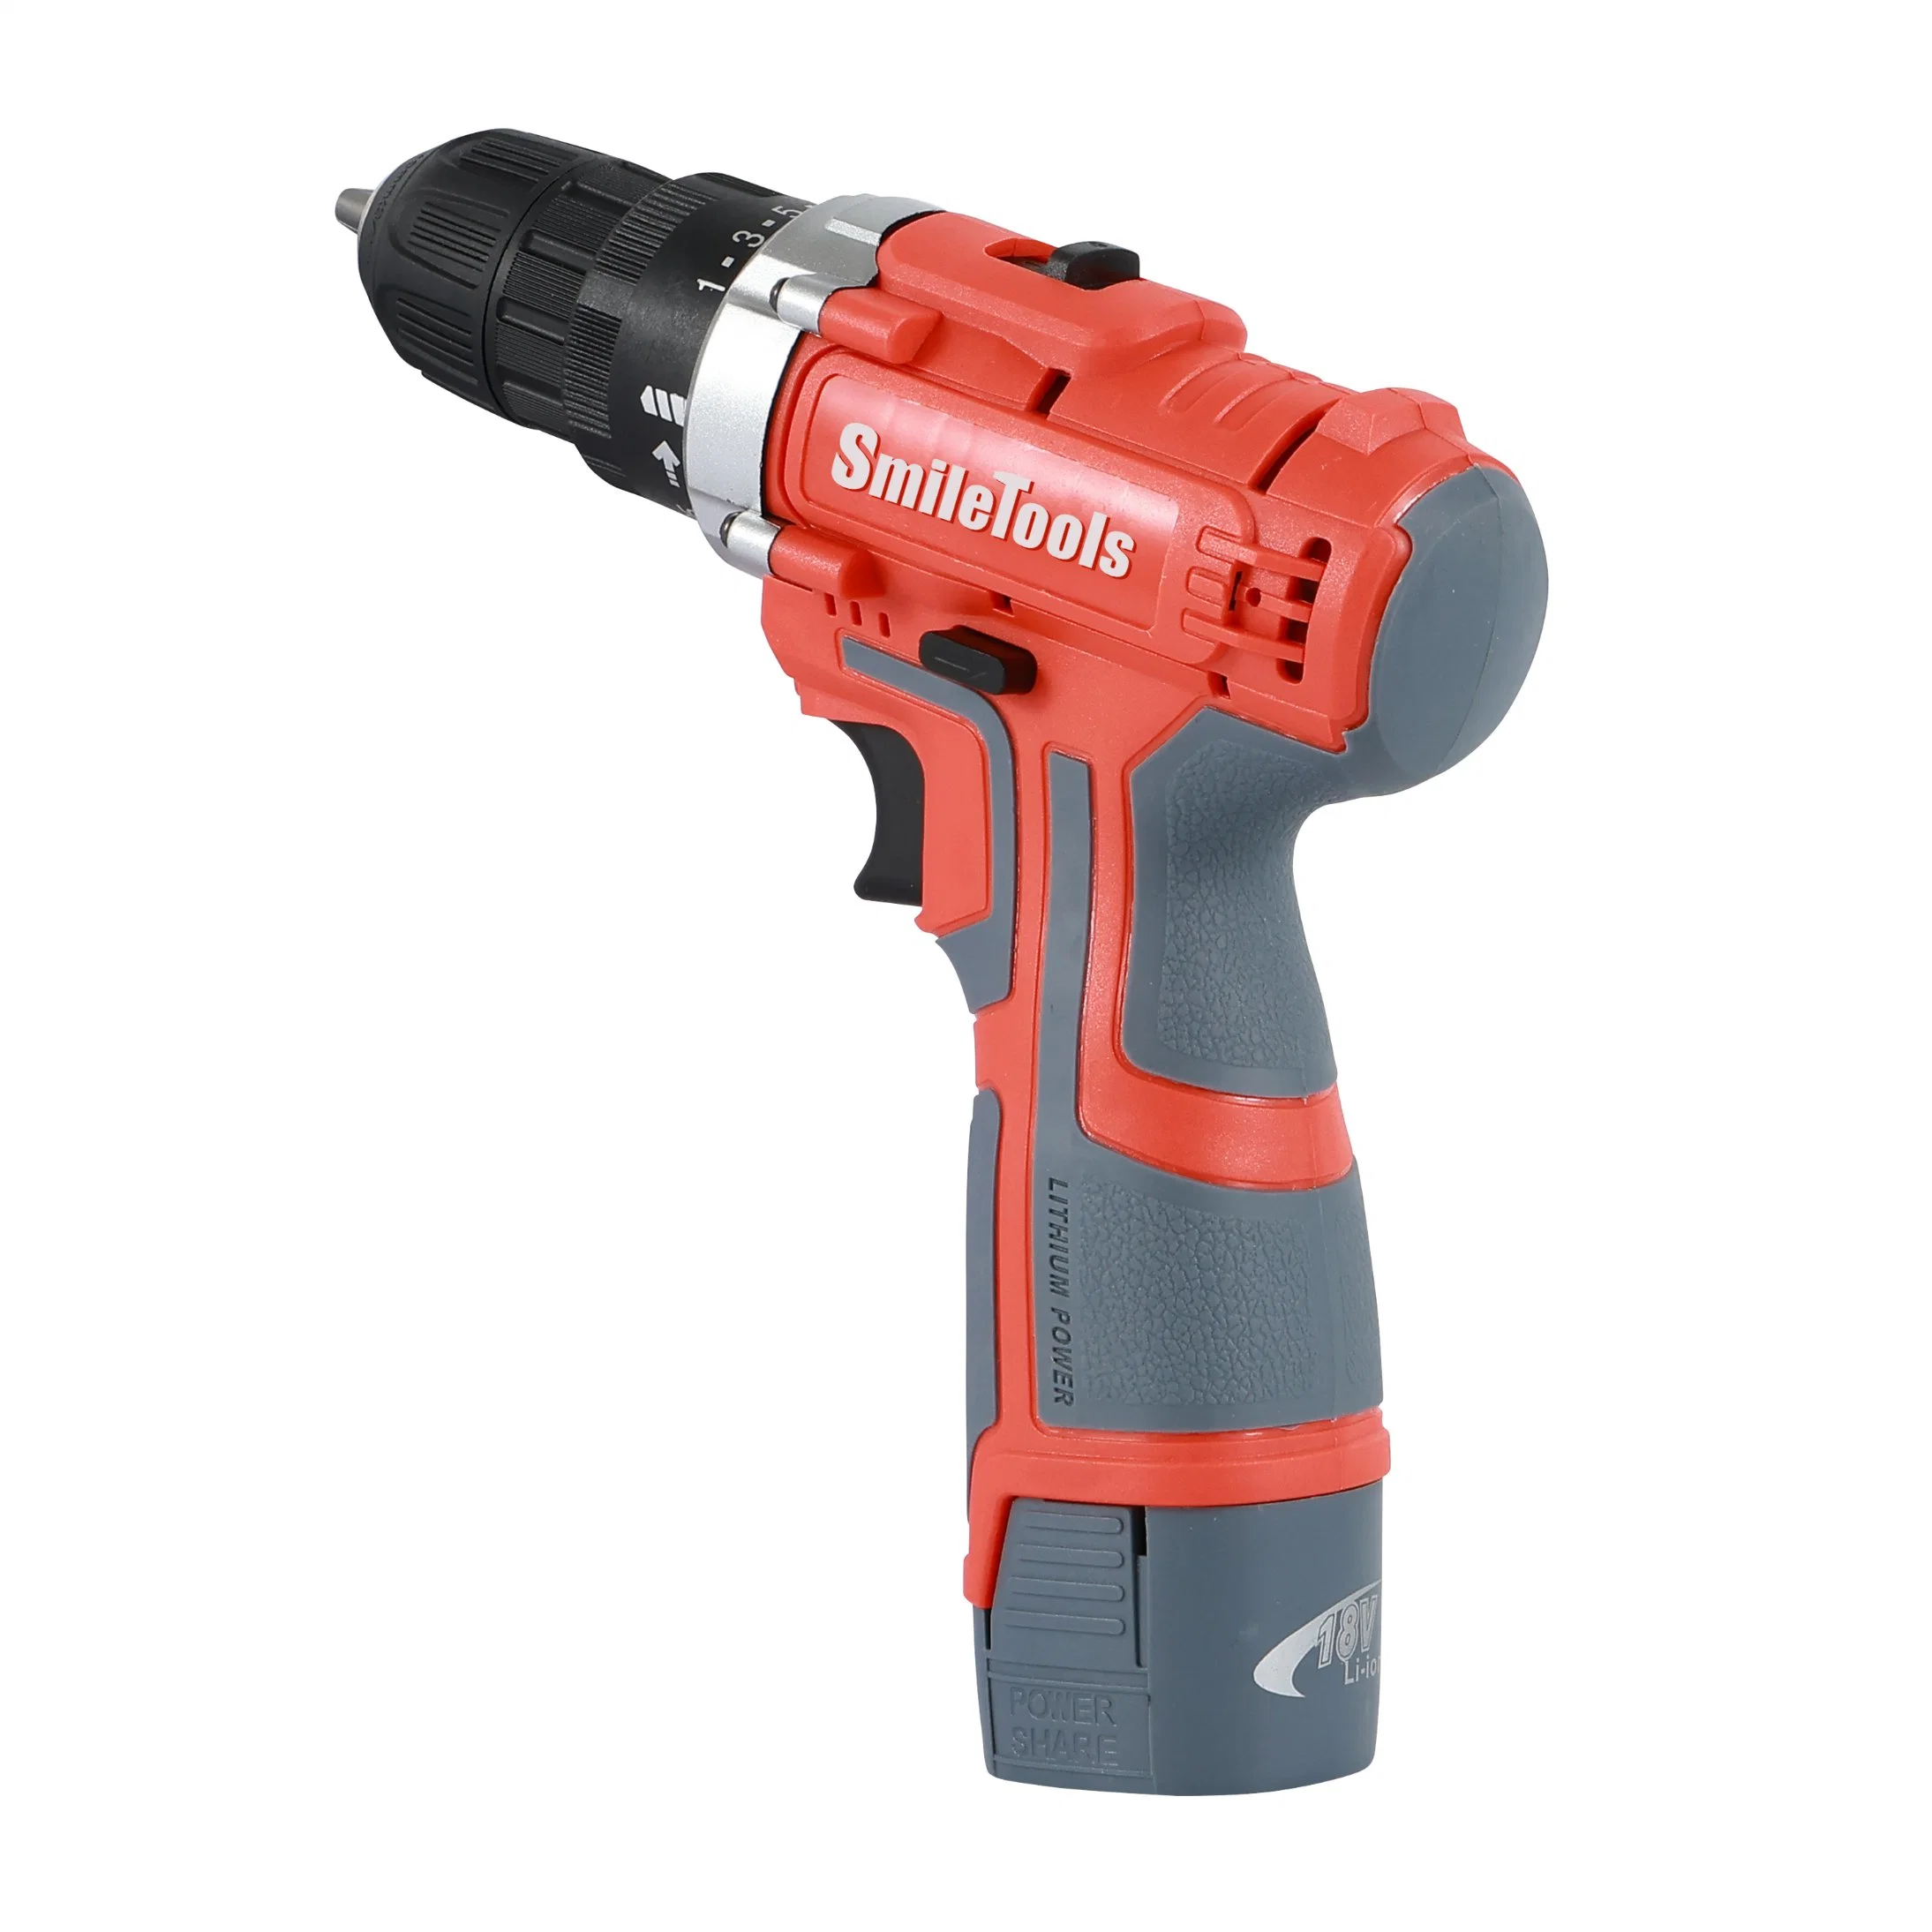 Tools 18V Mini Drilling Machines Hand Electric Tool Portable Inalambrico Electric Power Drill